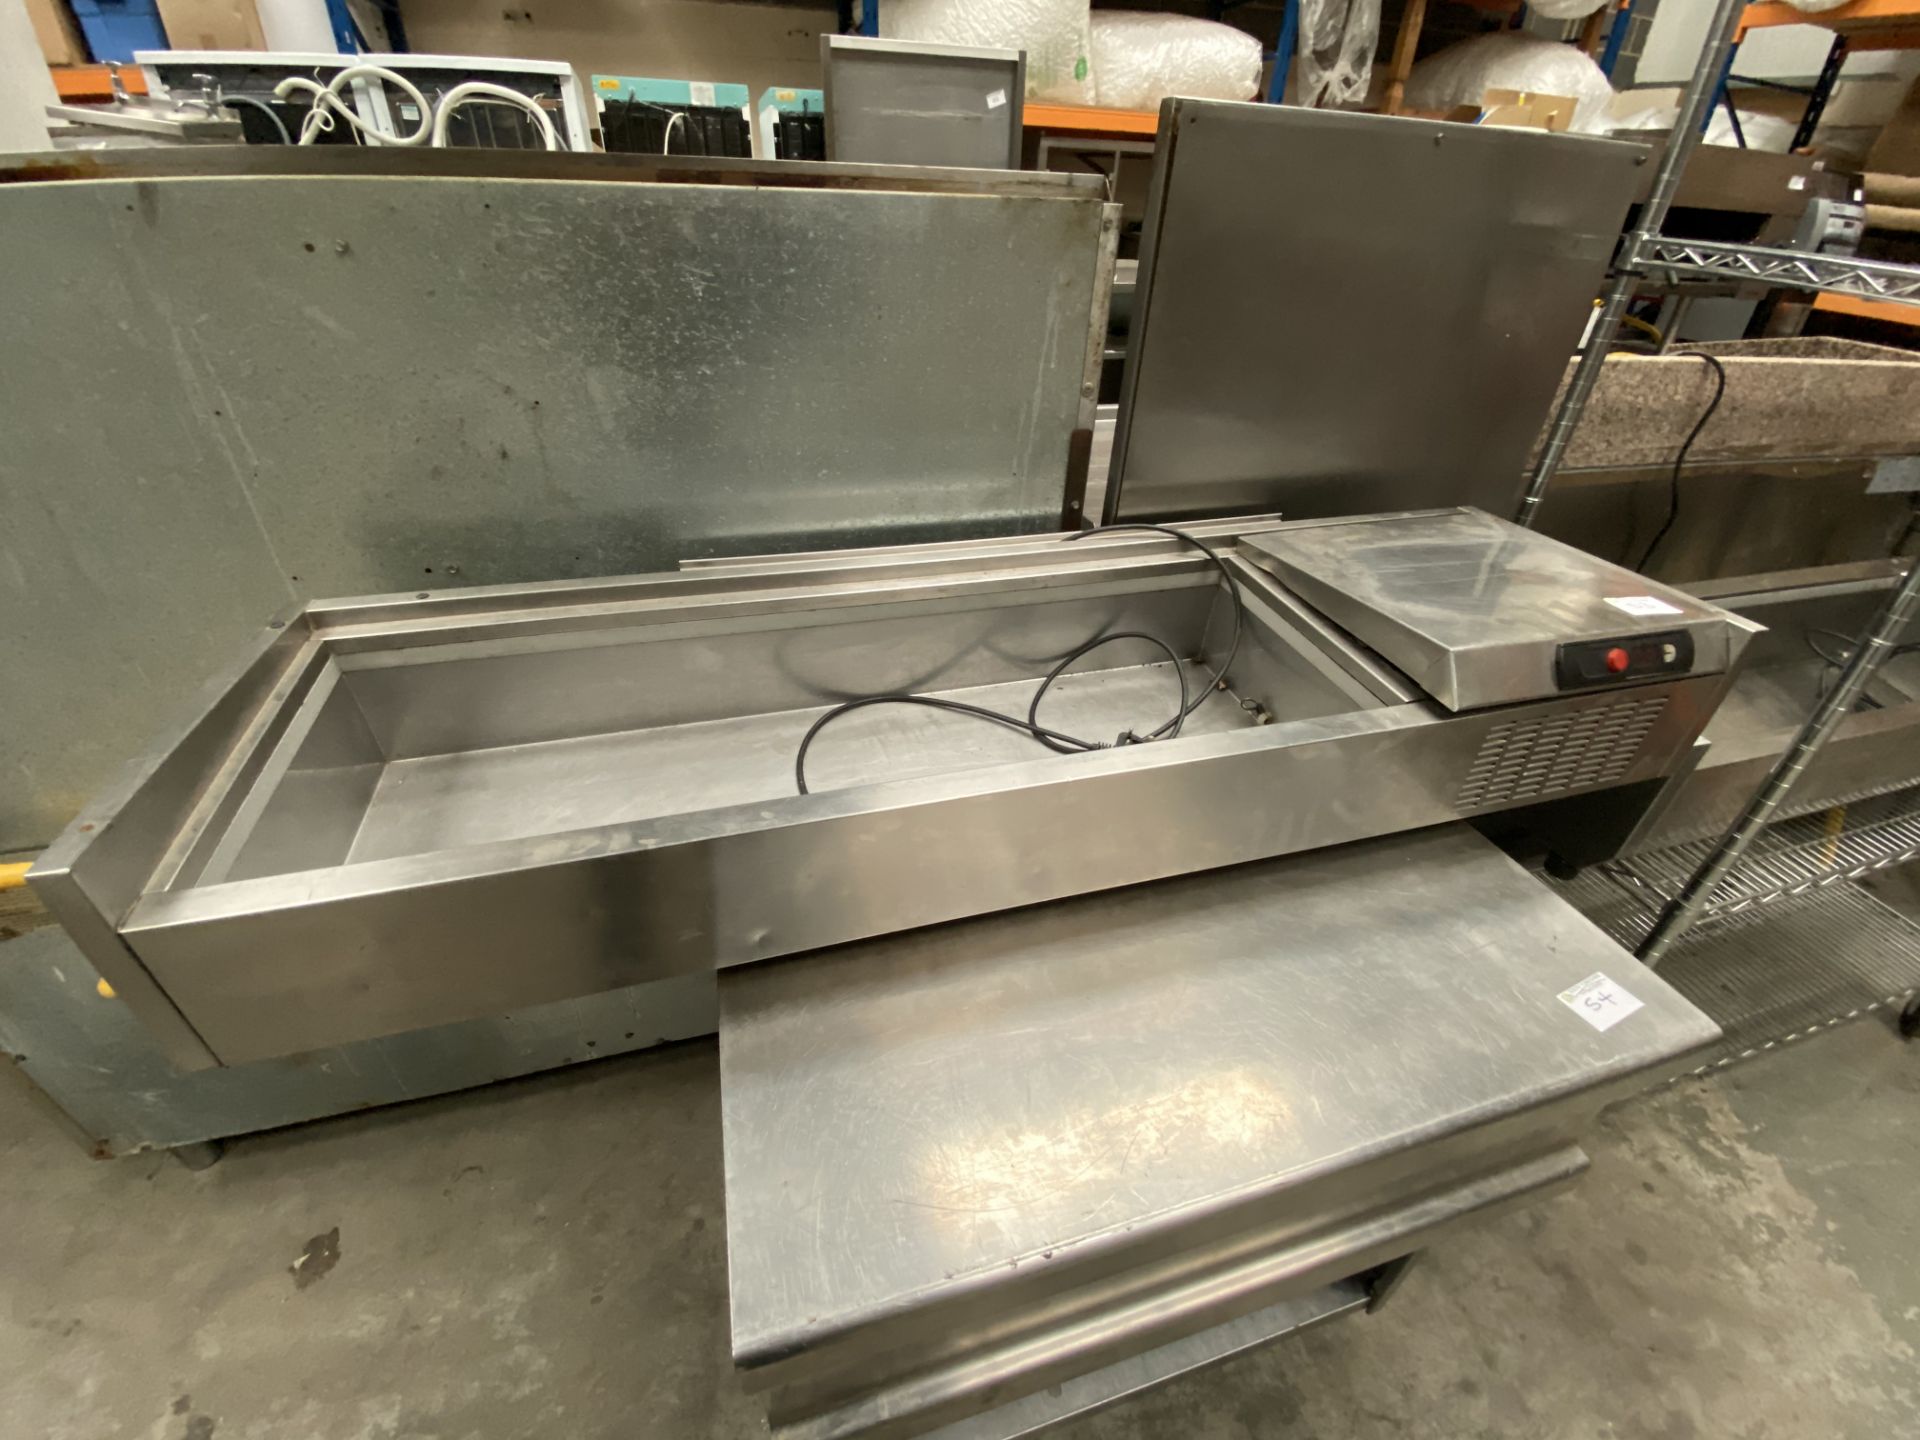 Refrigerated Pizza Topping Unit